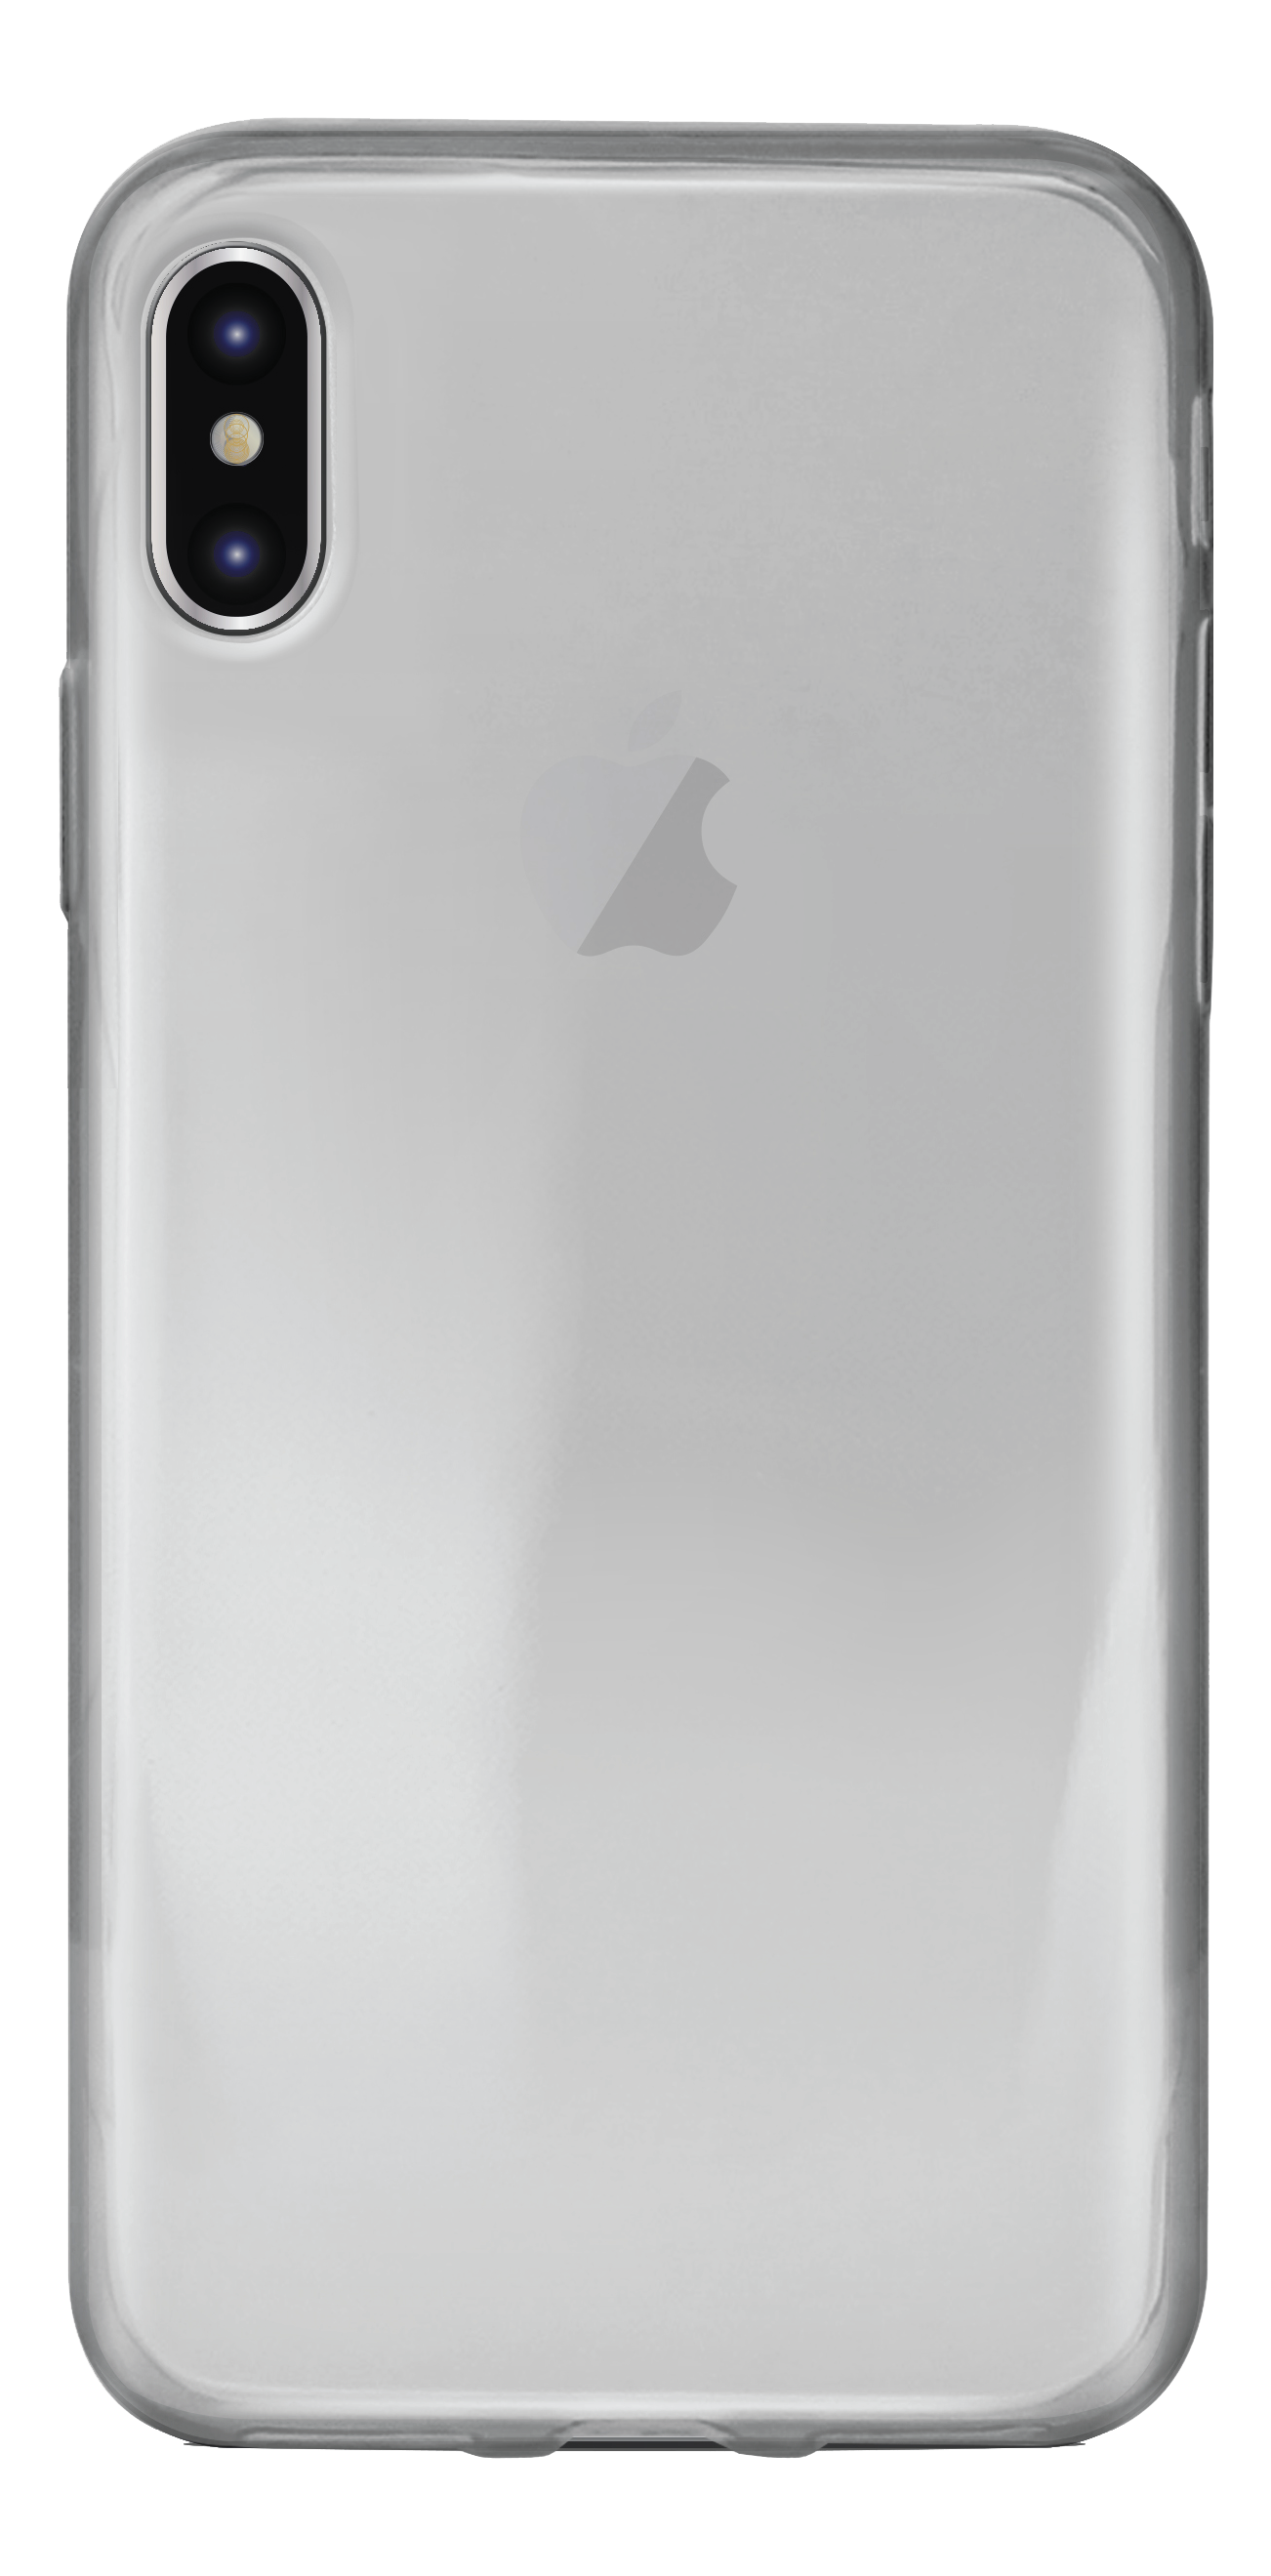 Case PURO 0.3 Nude for iPhone XR, transparent / IPCX6103NUDETR